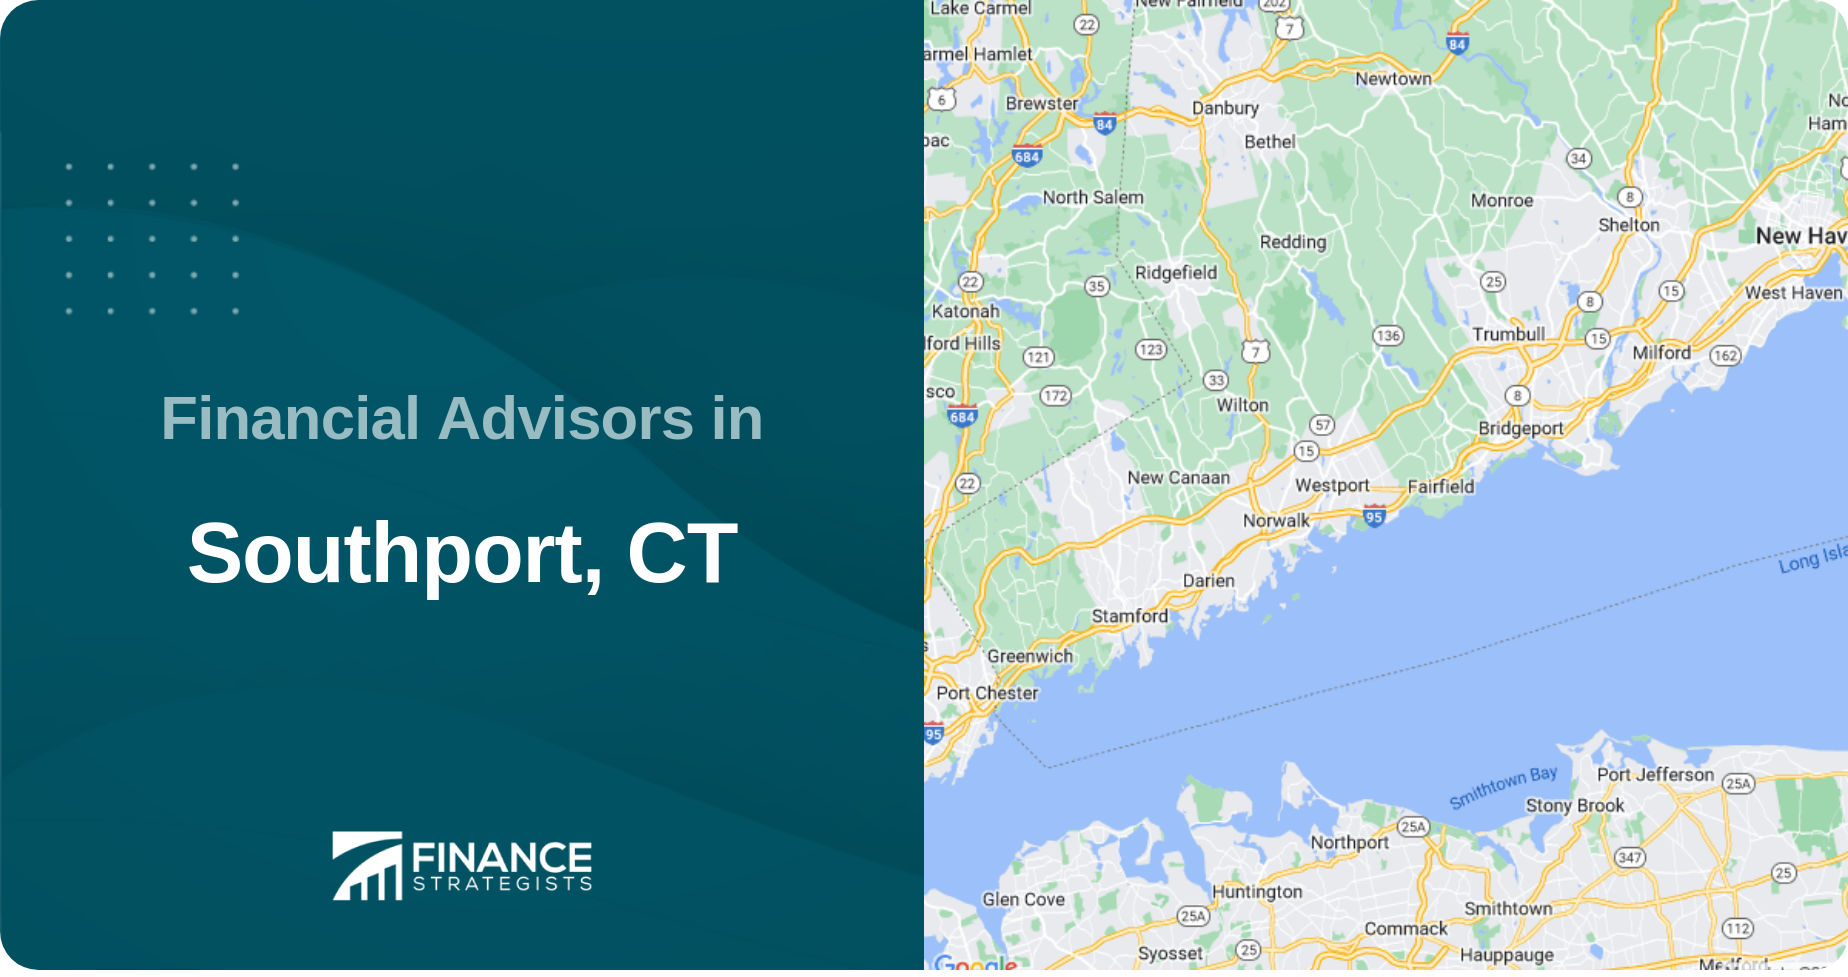 Financial Advisors in Southport, CT